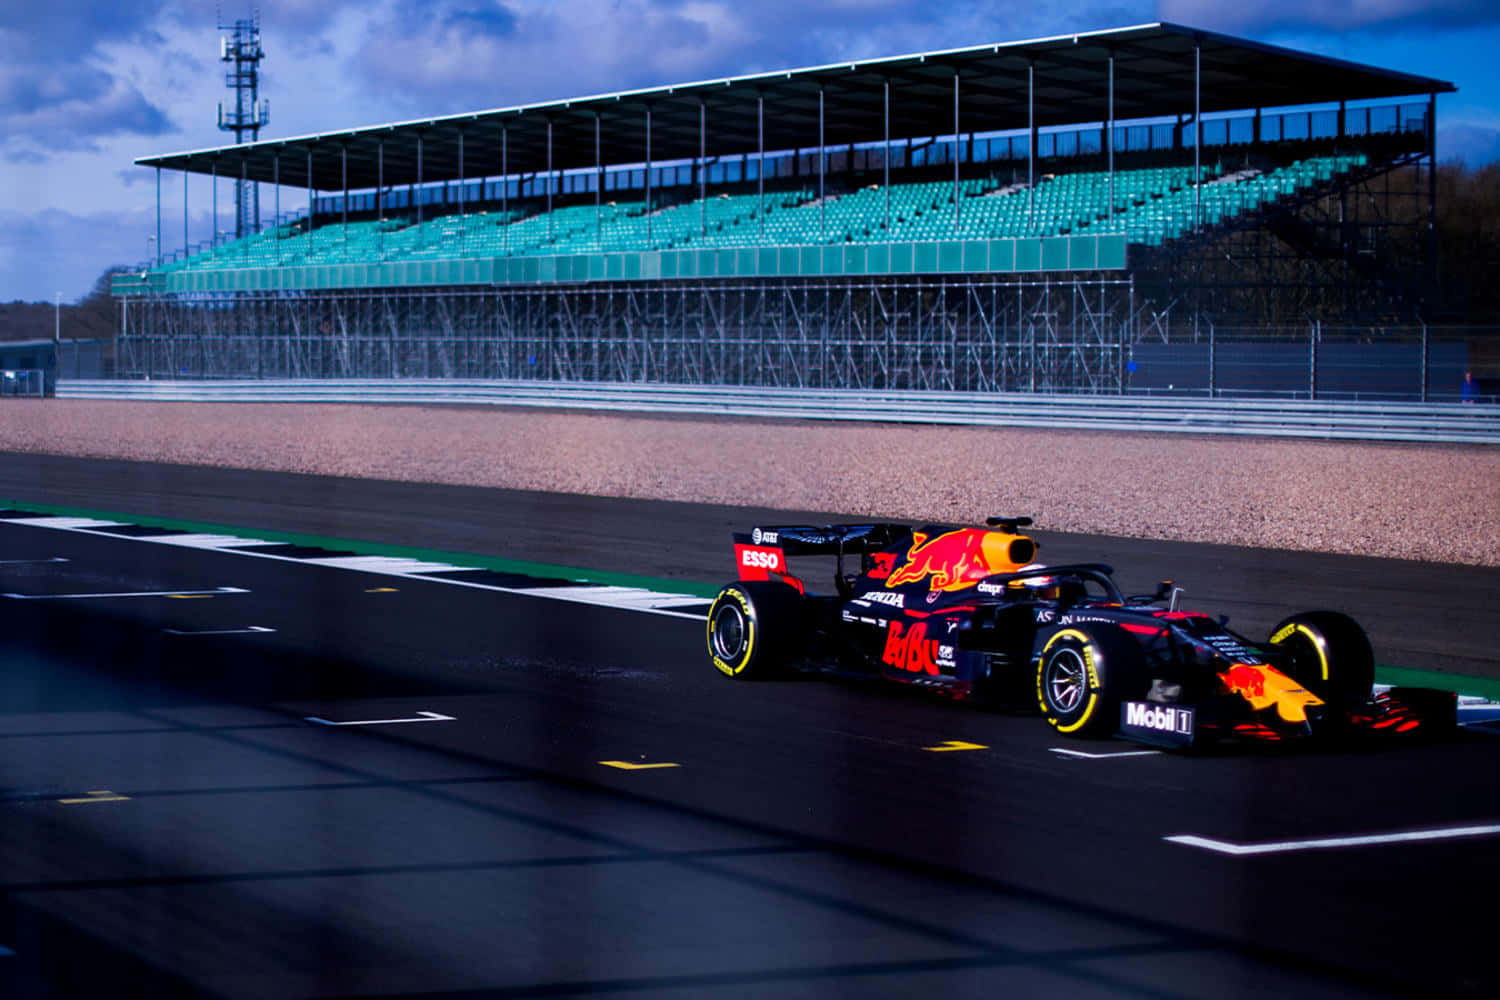 Red Bull Racing Car On A Track